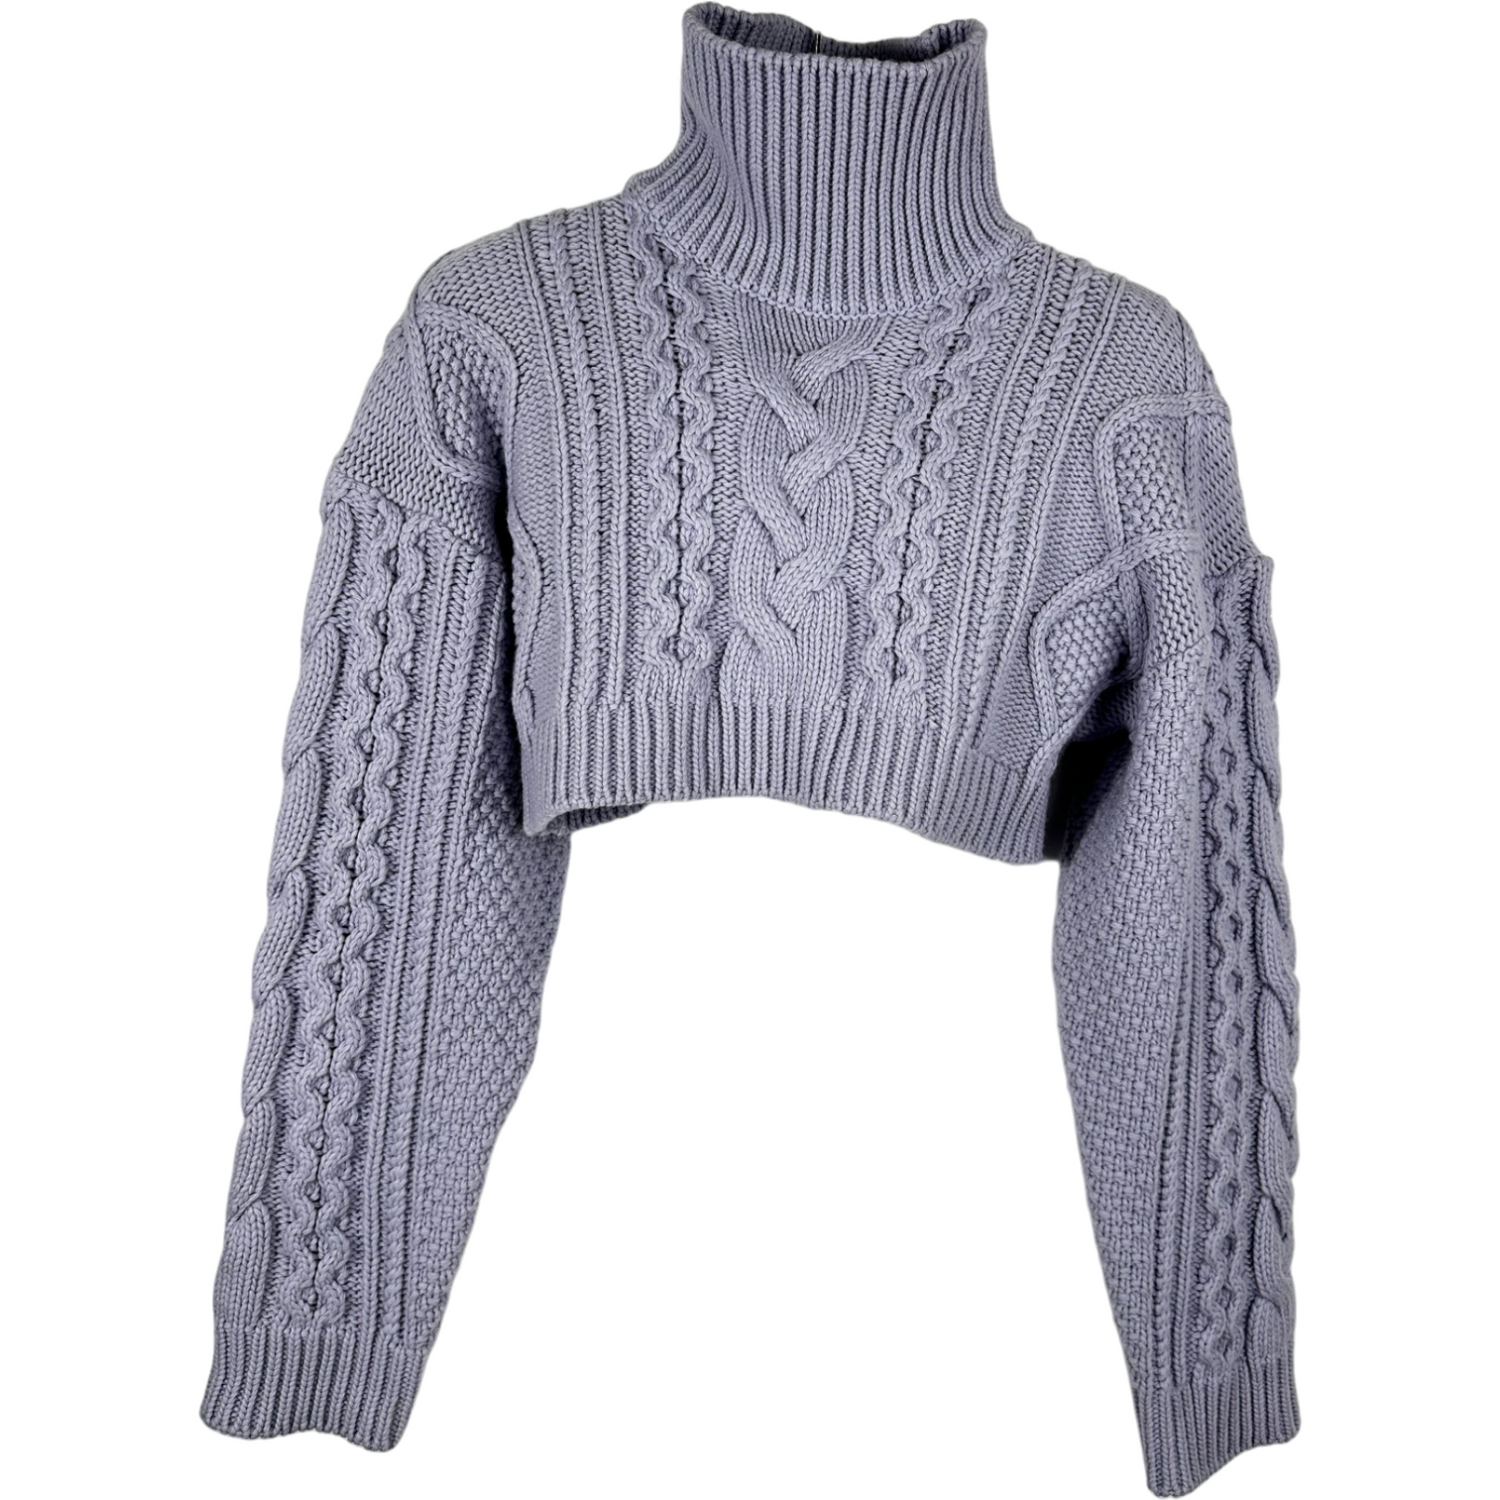 THE FRANKIE SHOP Cropped Lilac Cable Knit Jumper